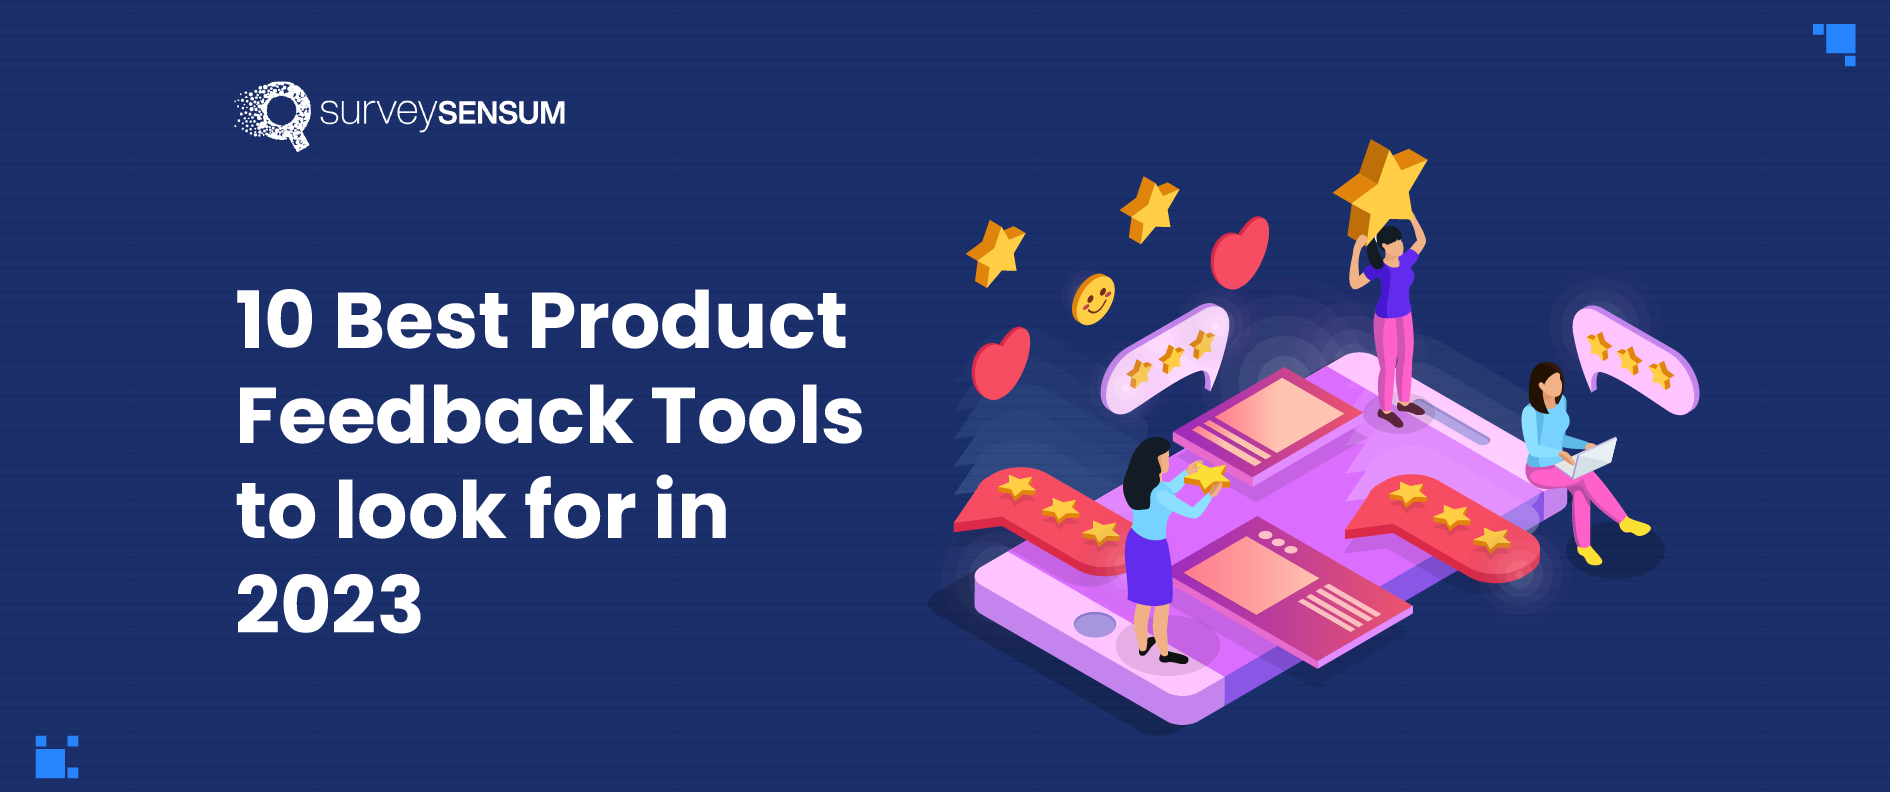 10 Best Product Feedback Tools for 2023